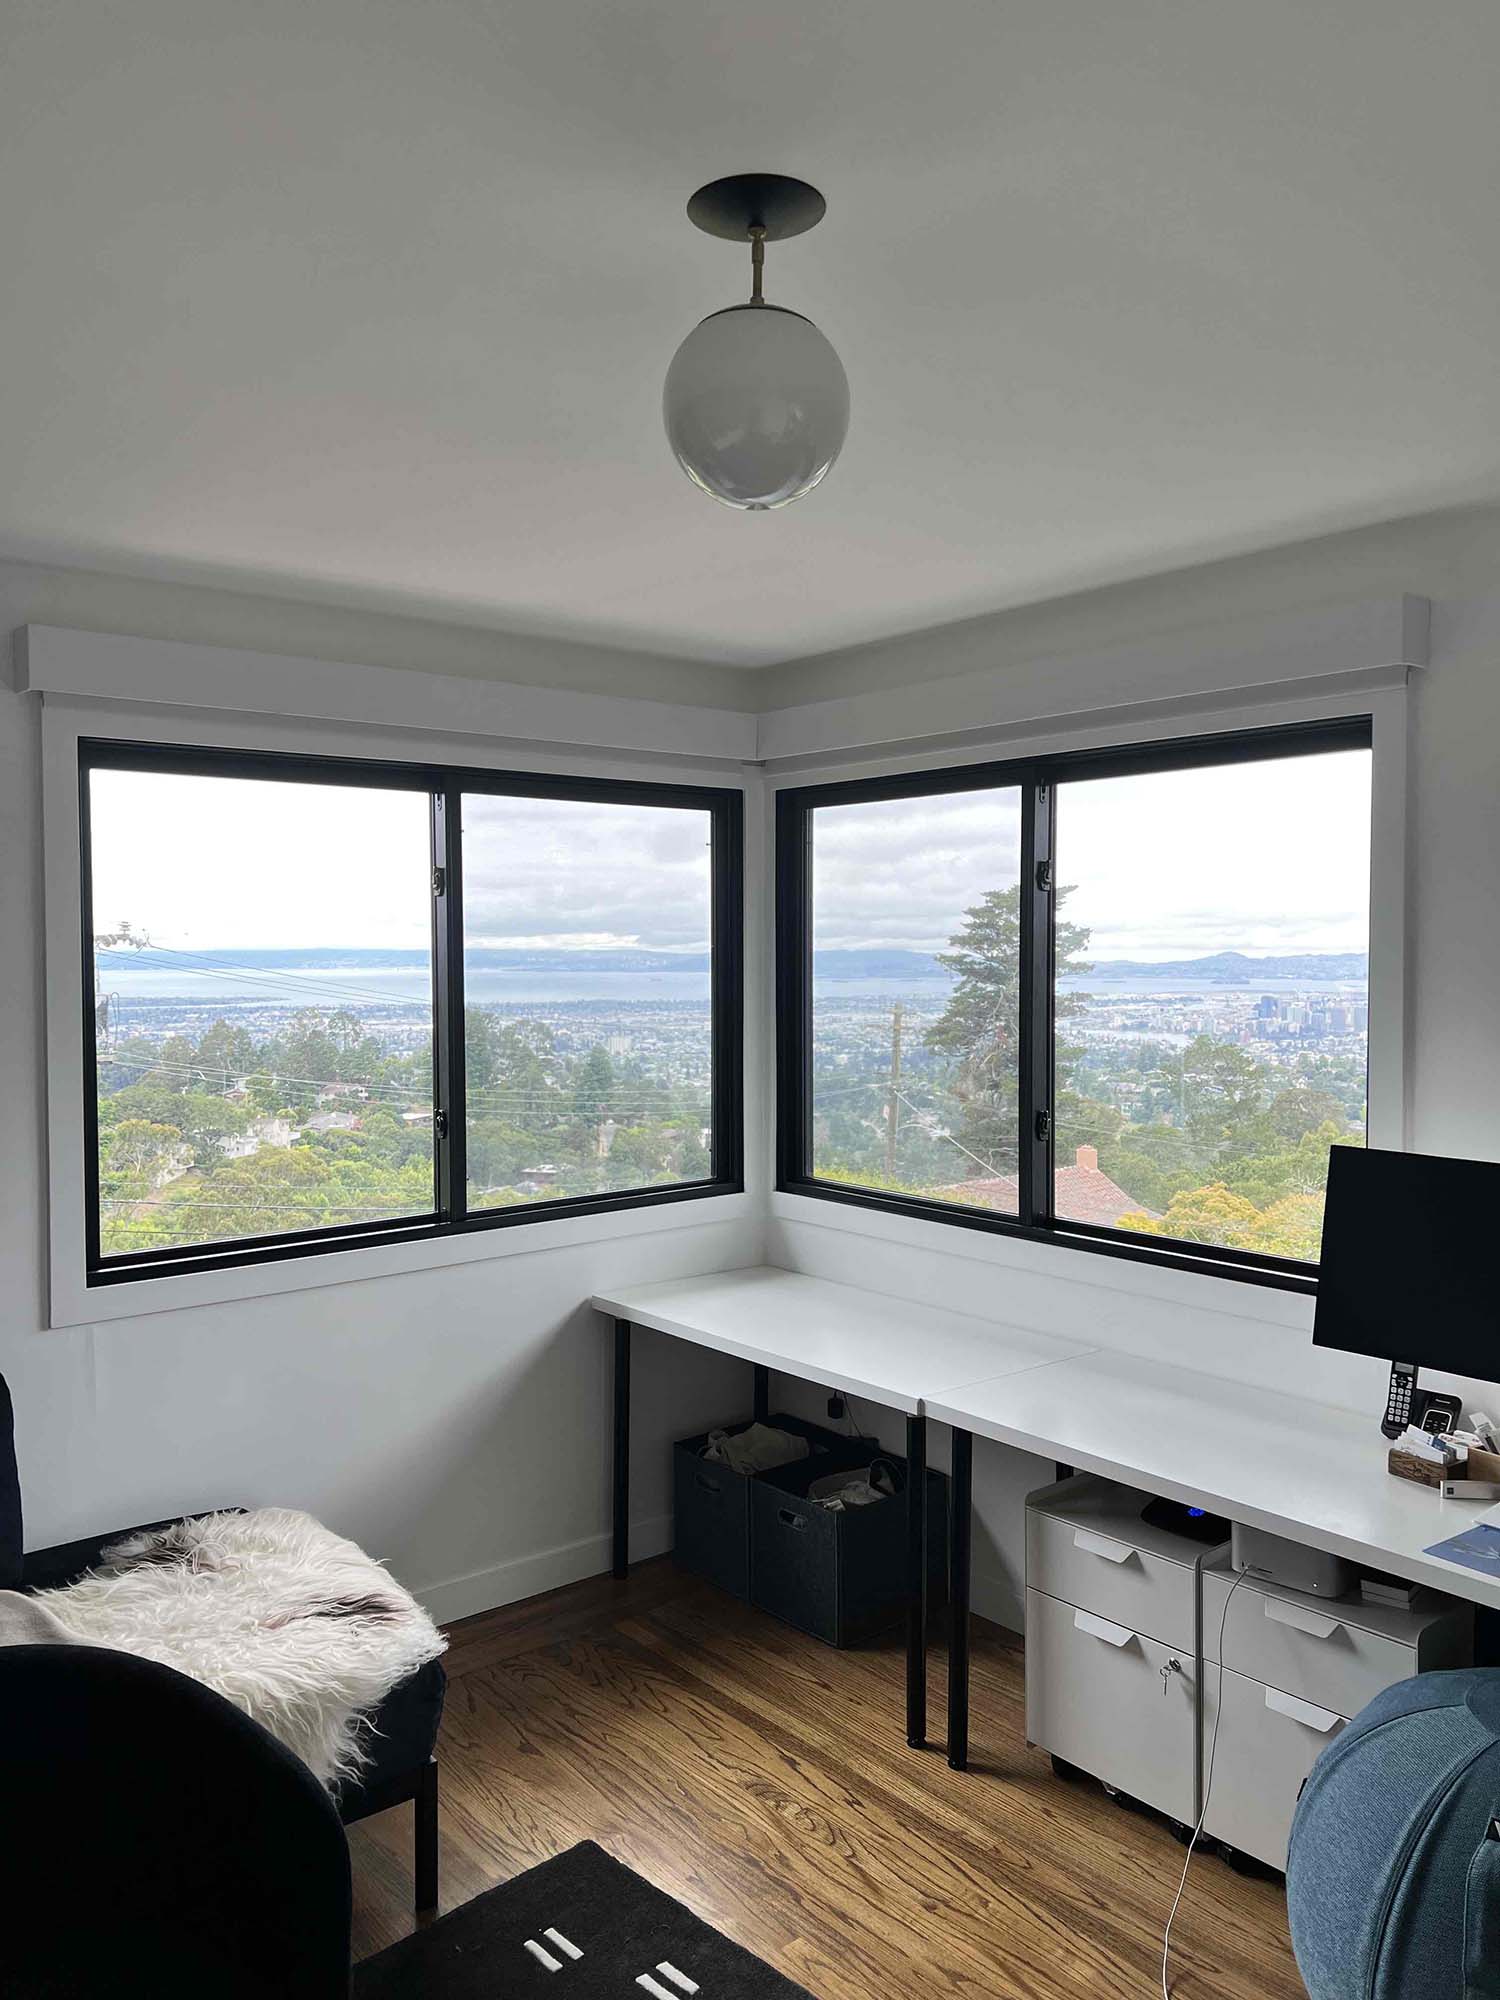 The Best Heat Control Window Film for Oakland, CA Homes, installed by ClimatePro.